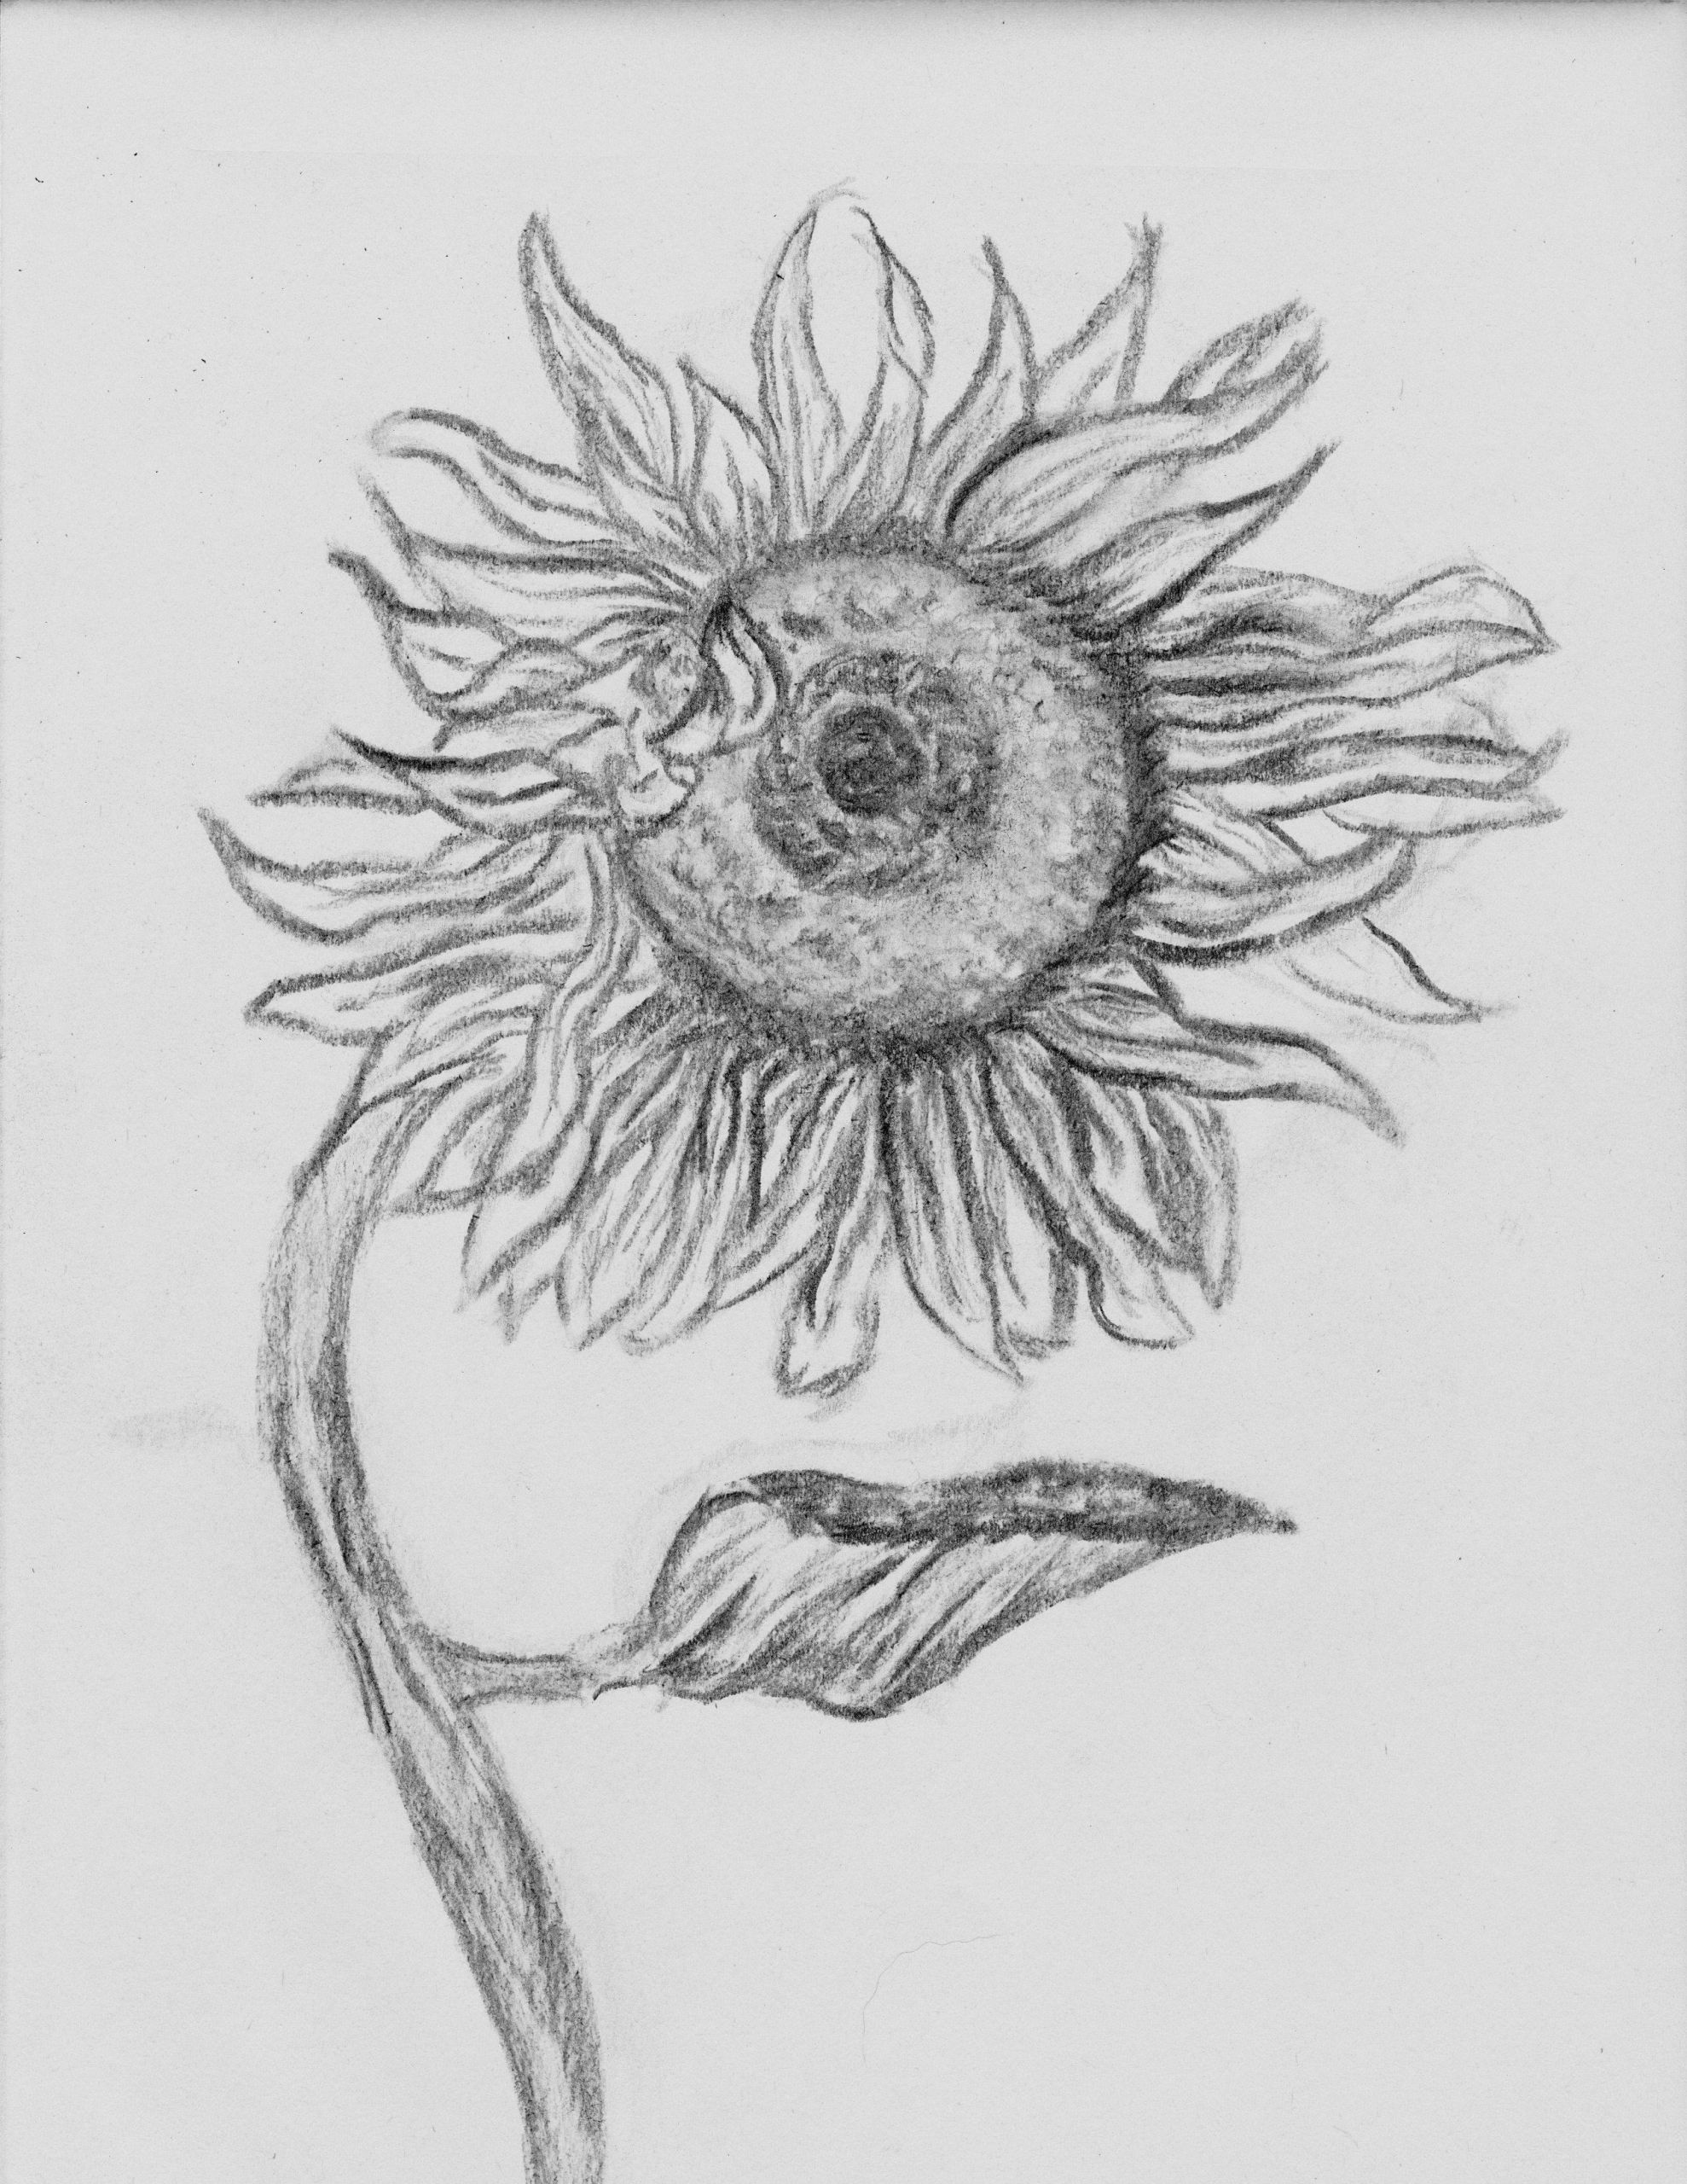 Sunflower Drawing Easy Step by Step How to Draw A Sunflower Step by Step Easy Google Search